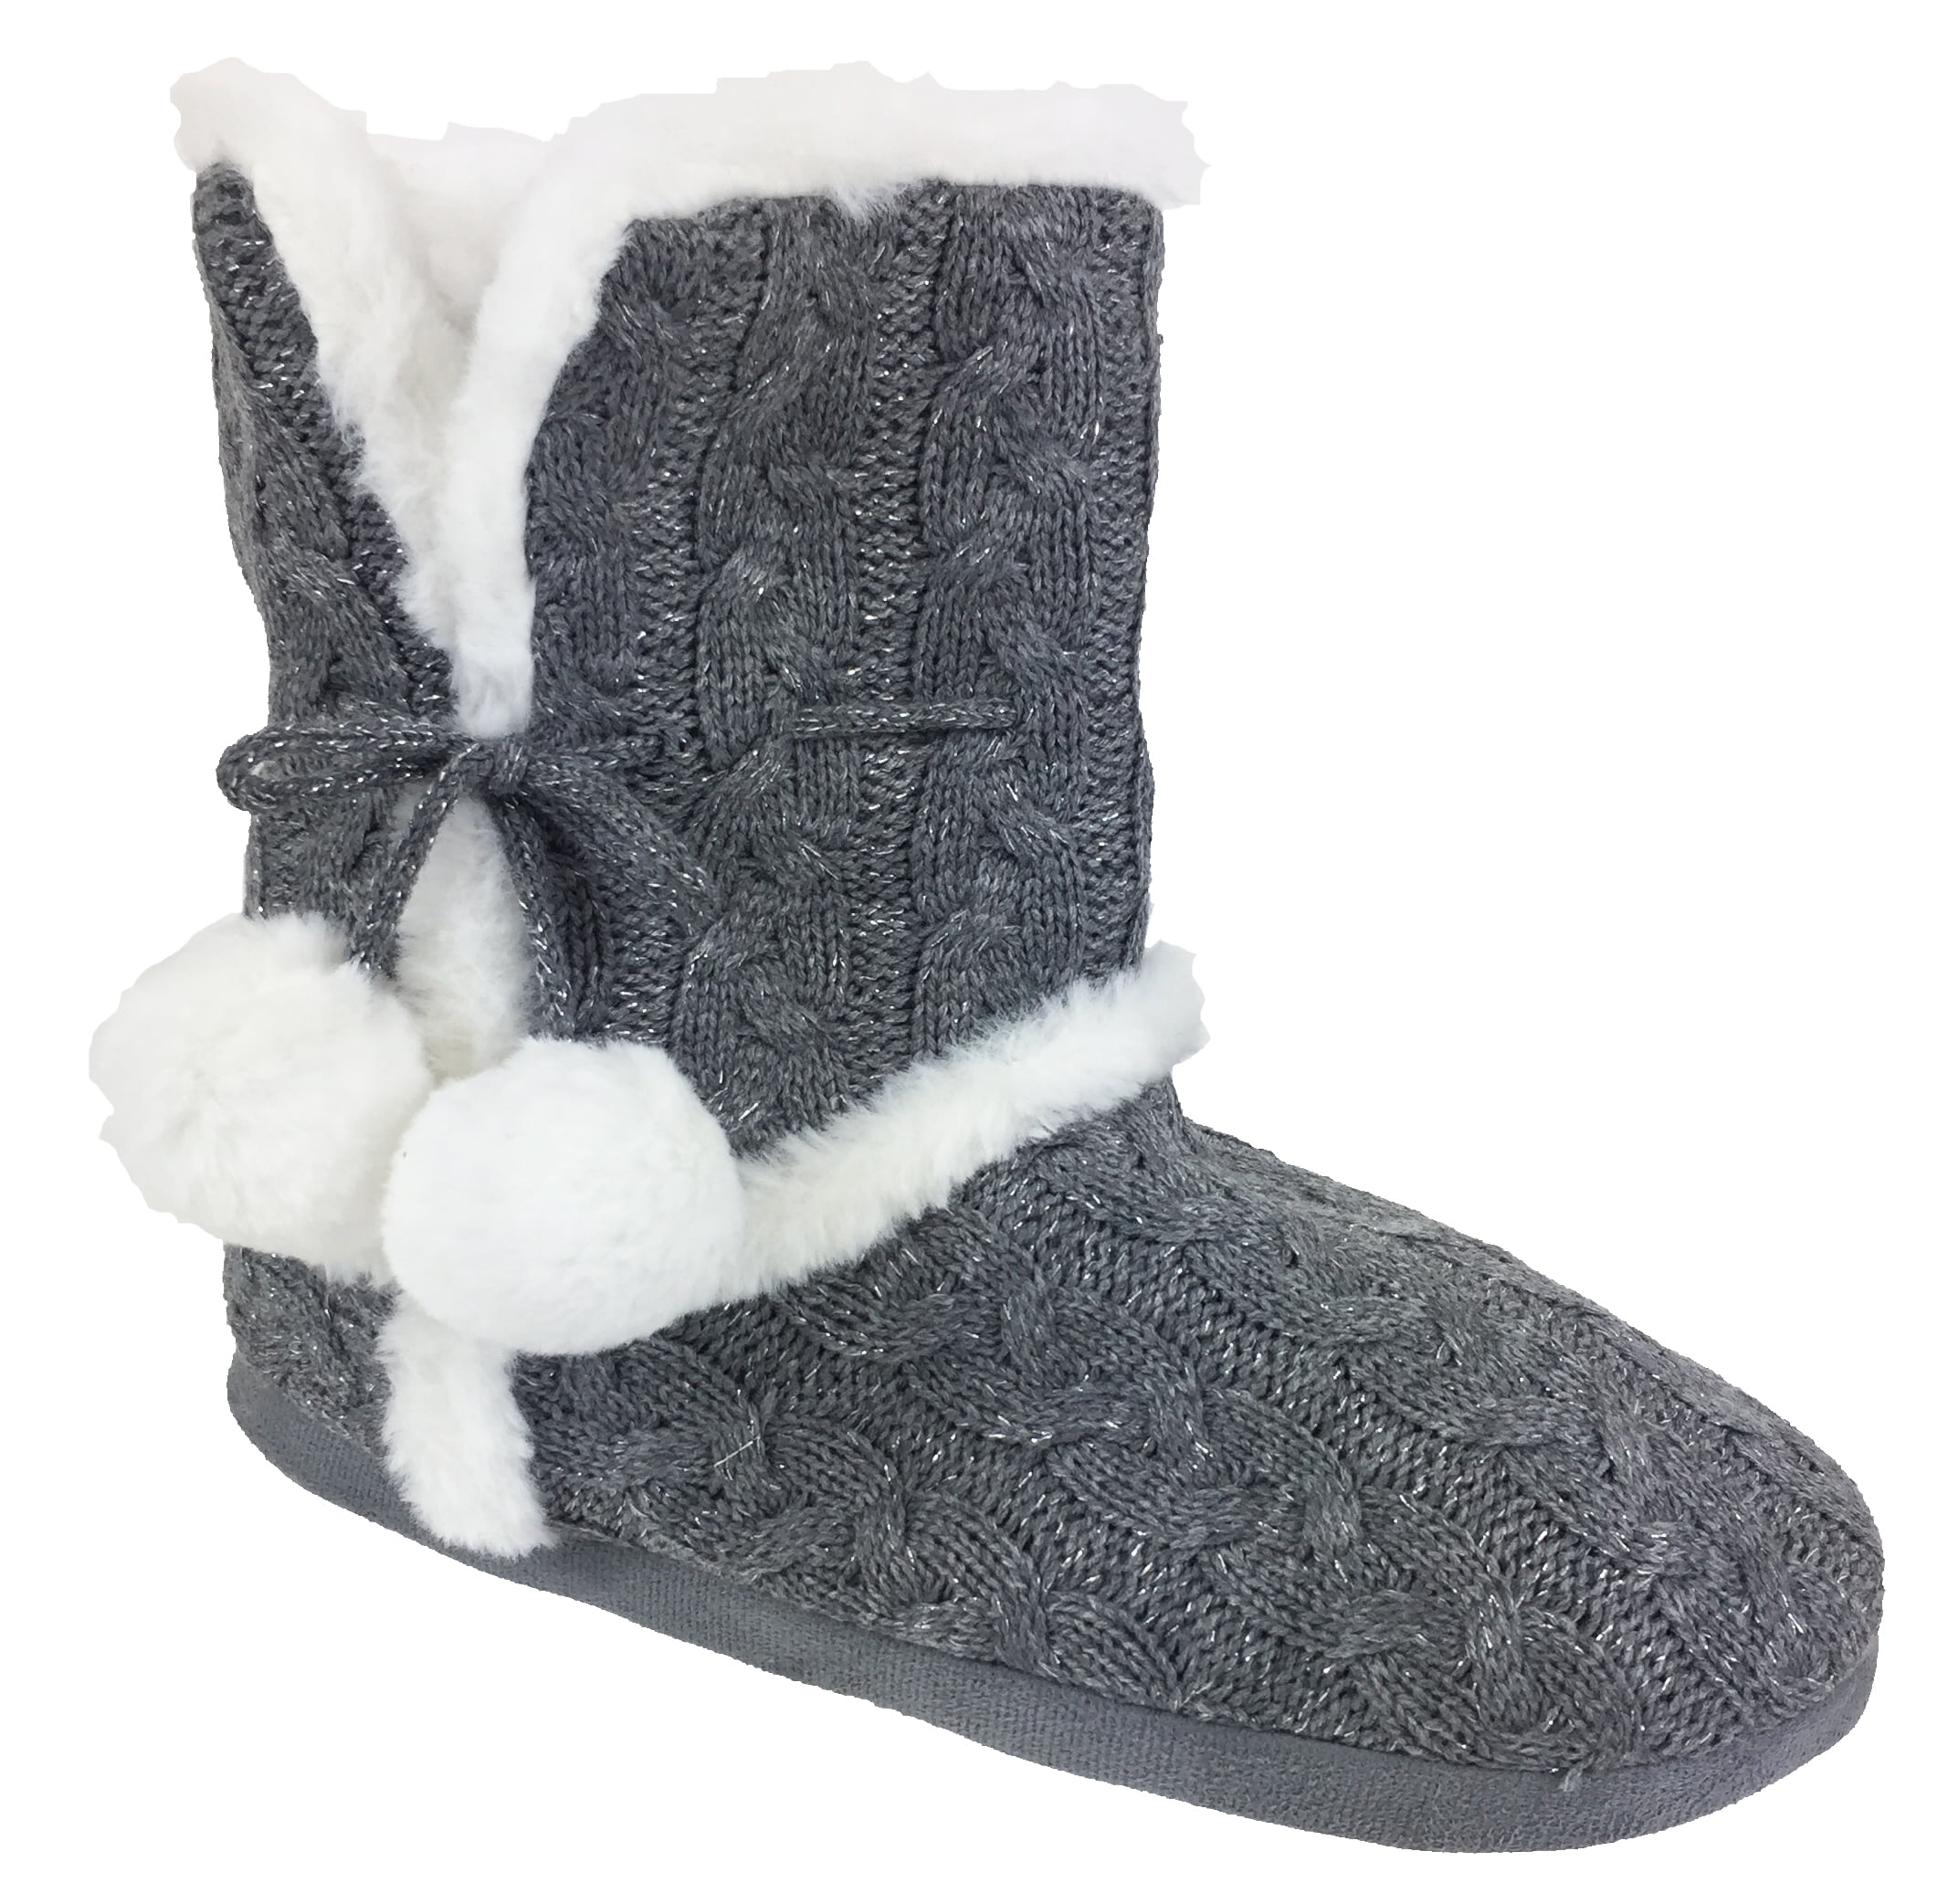 Ladies Slippers Womens Ankle Boots New Pompom Winter Warm Fur Booties Size 3-9 